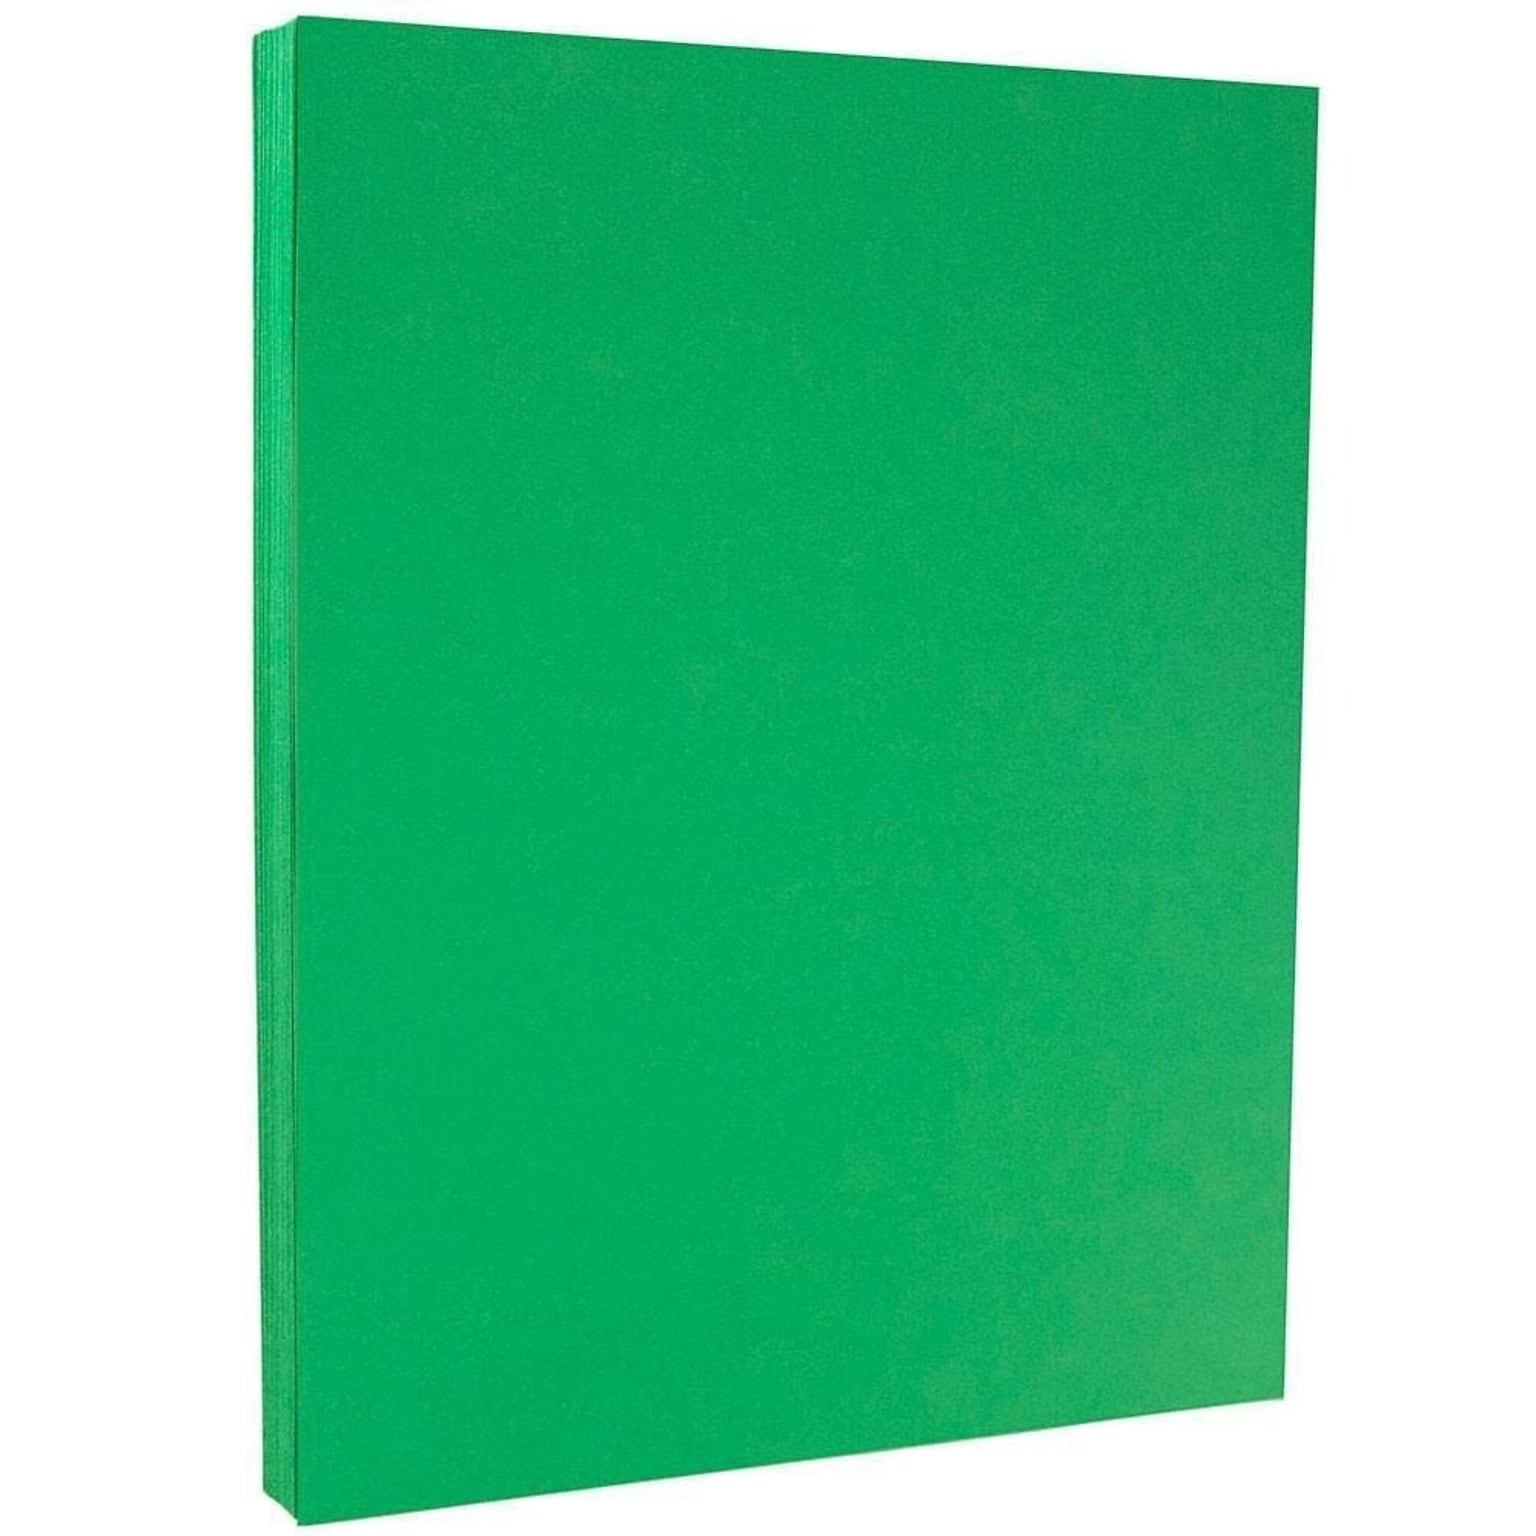 JAM PAPER 8.5 x 11 Colored Cardstock, 65lb, Green, 100/pack  (104190G)